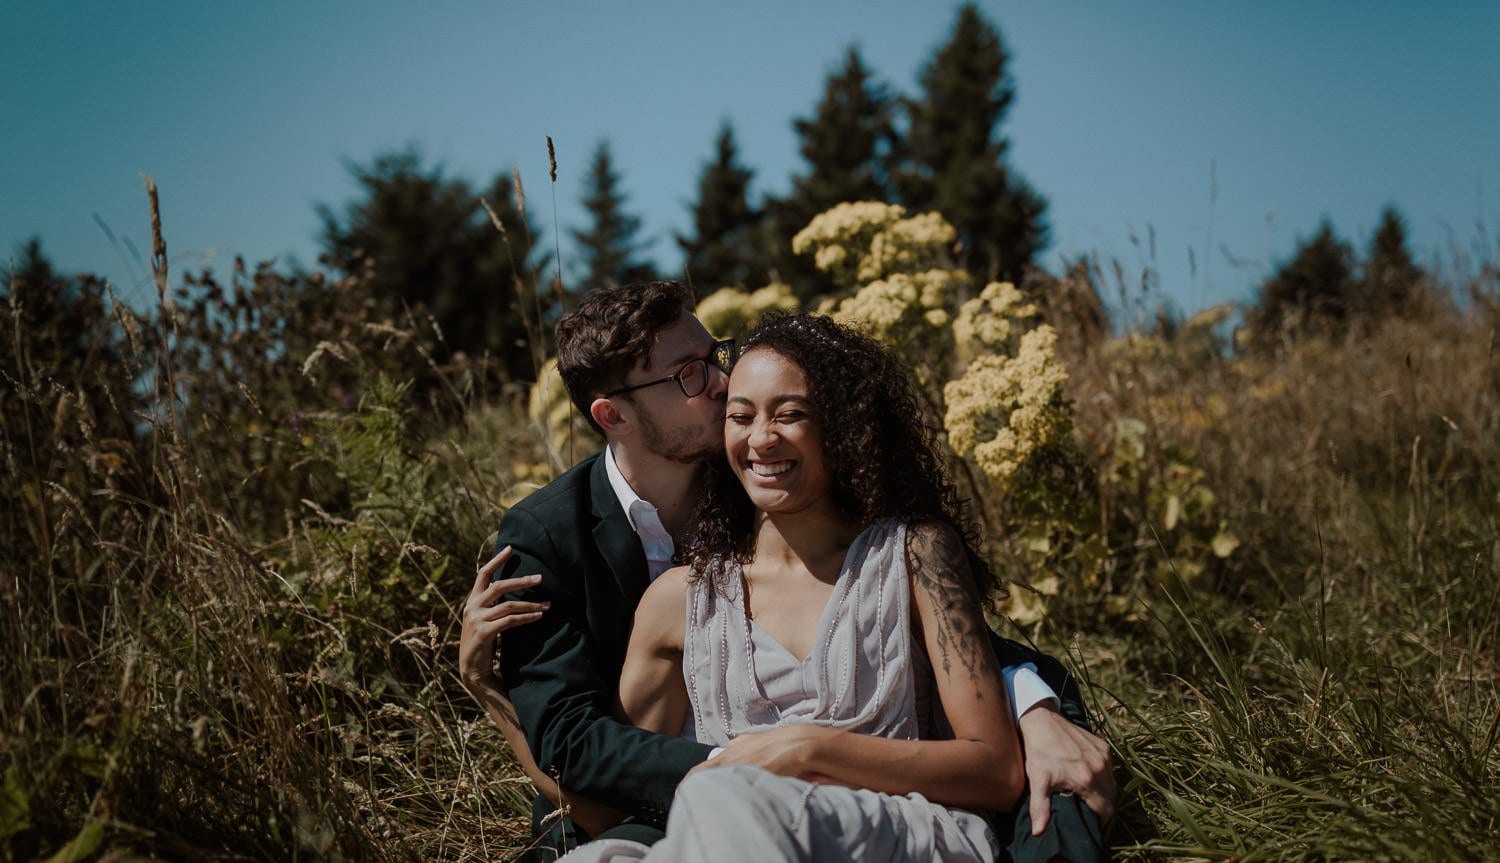 Adorable eloping couple snuggle on the ground among the wildflowers before their God's thumb elopement on the Oregon coast. The bride wears a lavender wedding dress and the groom has a dark blue suit on. The groom kisses the side of her cheek and she laughs happily